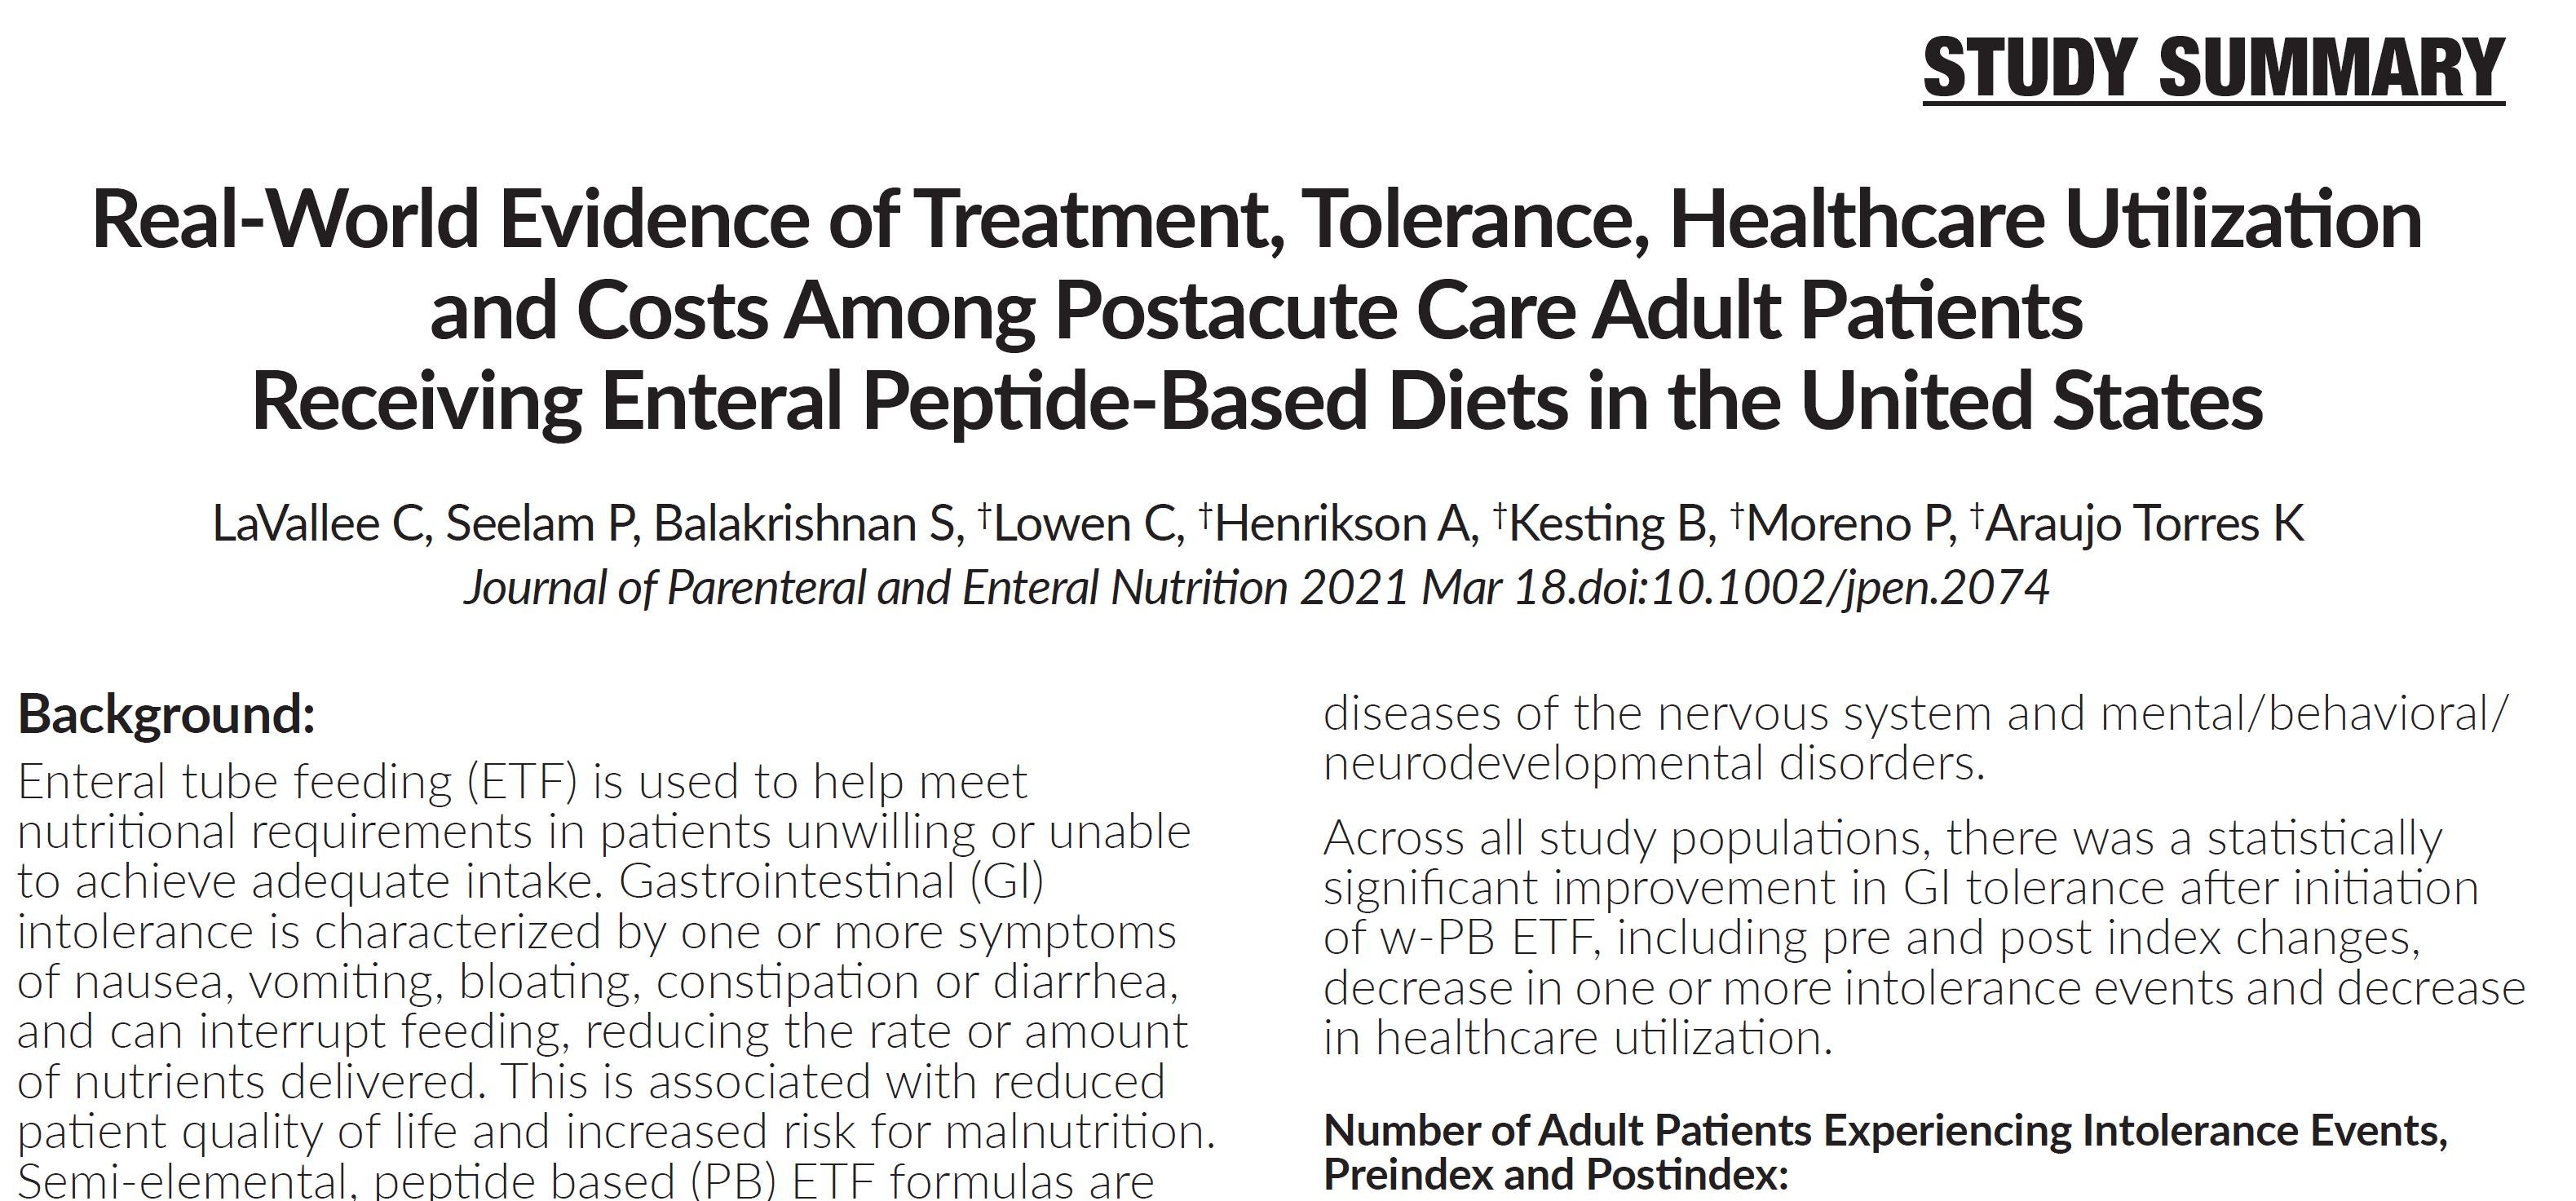 Real-World Evidence of Treatment, Tolerance, Healthcare Utilization and Costs Among Postacute Care Adult Patients Receiving Enteral Peptide-Based Diets in the United States